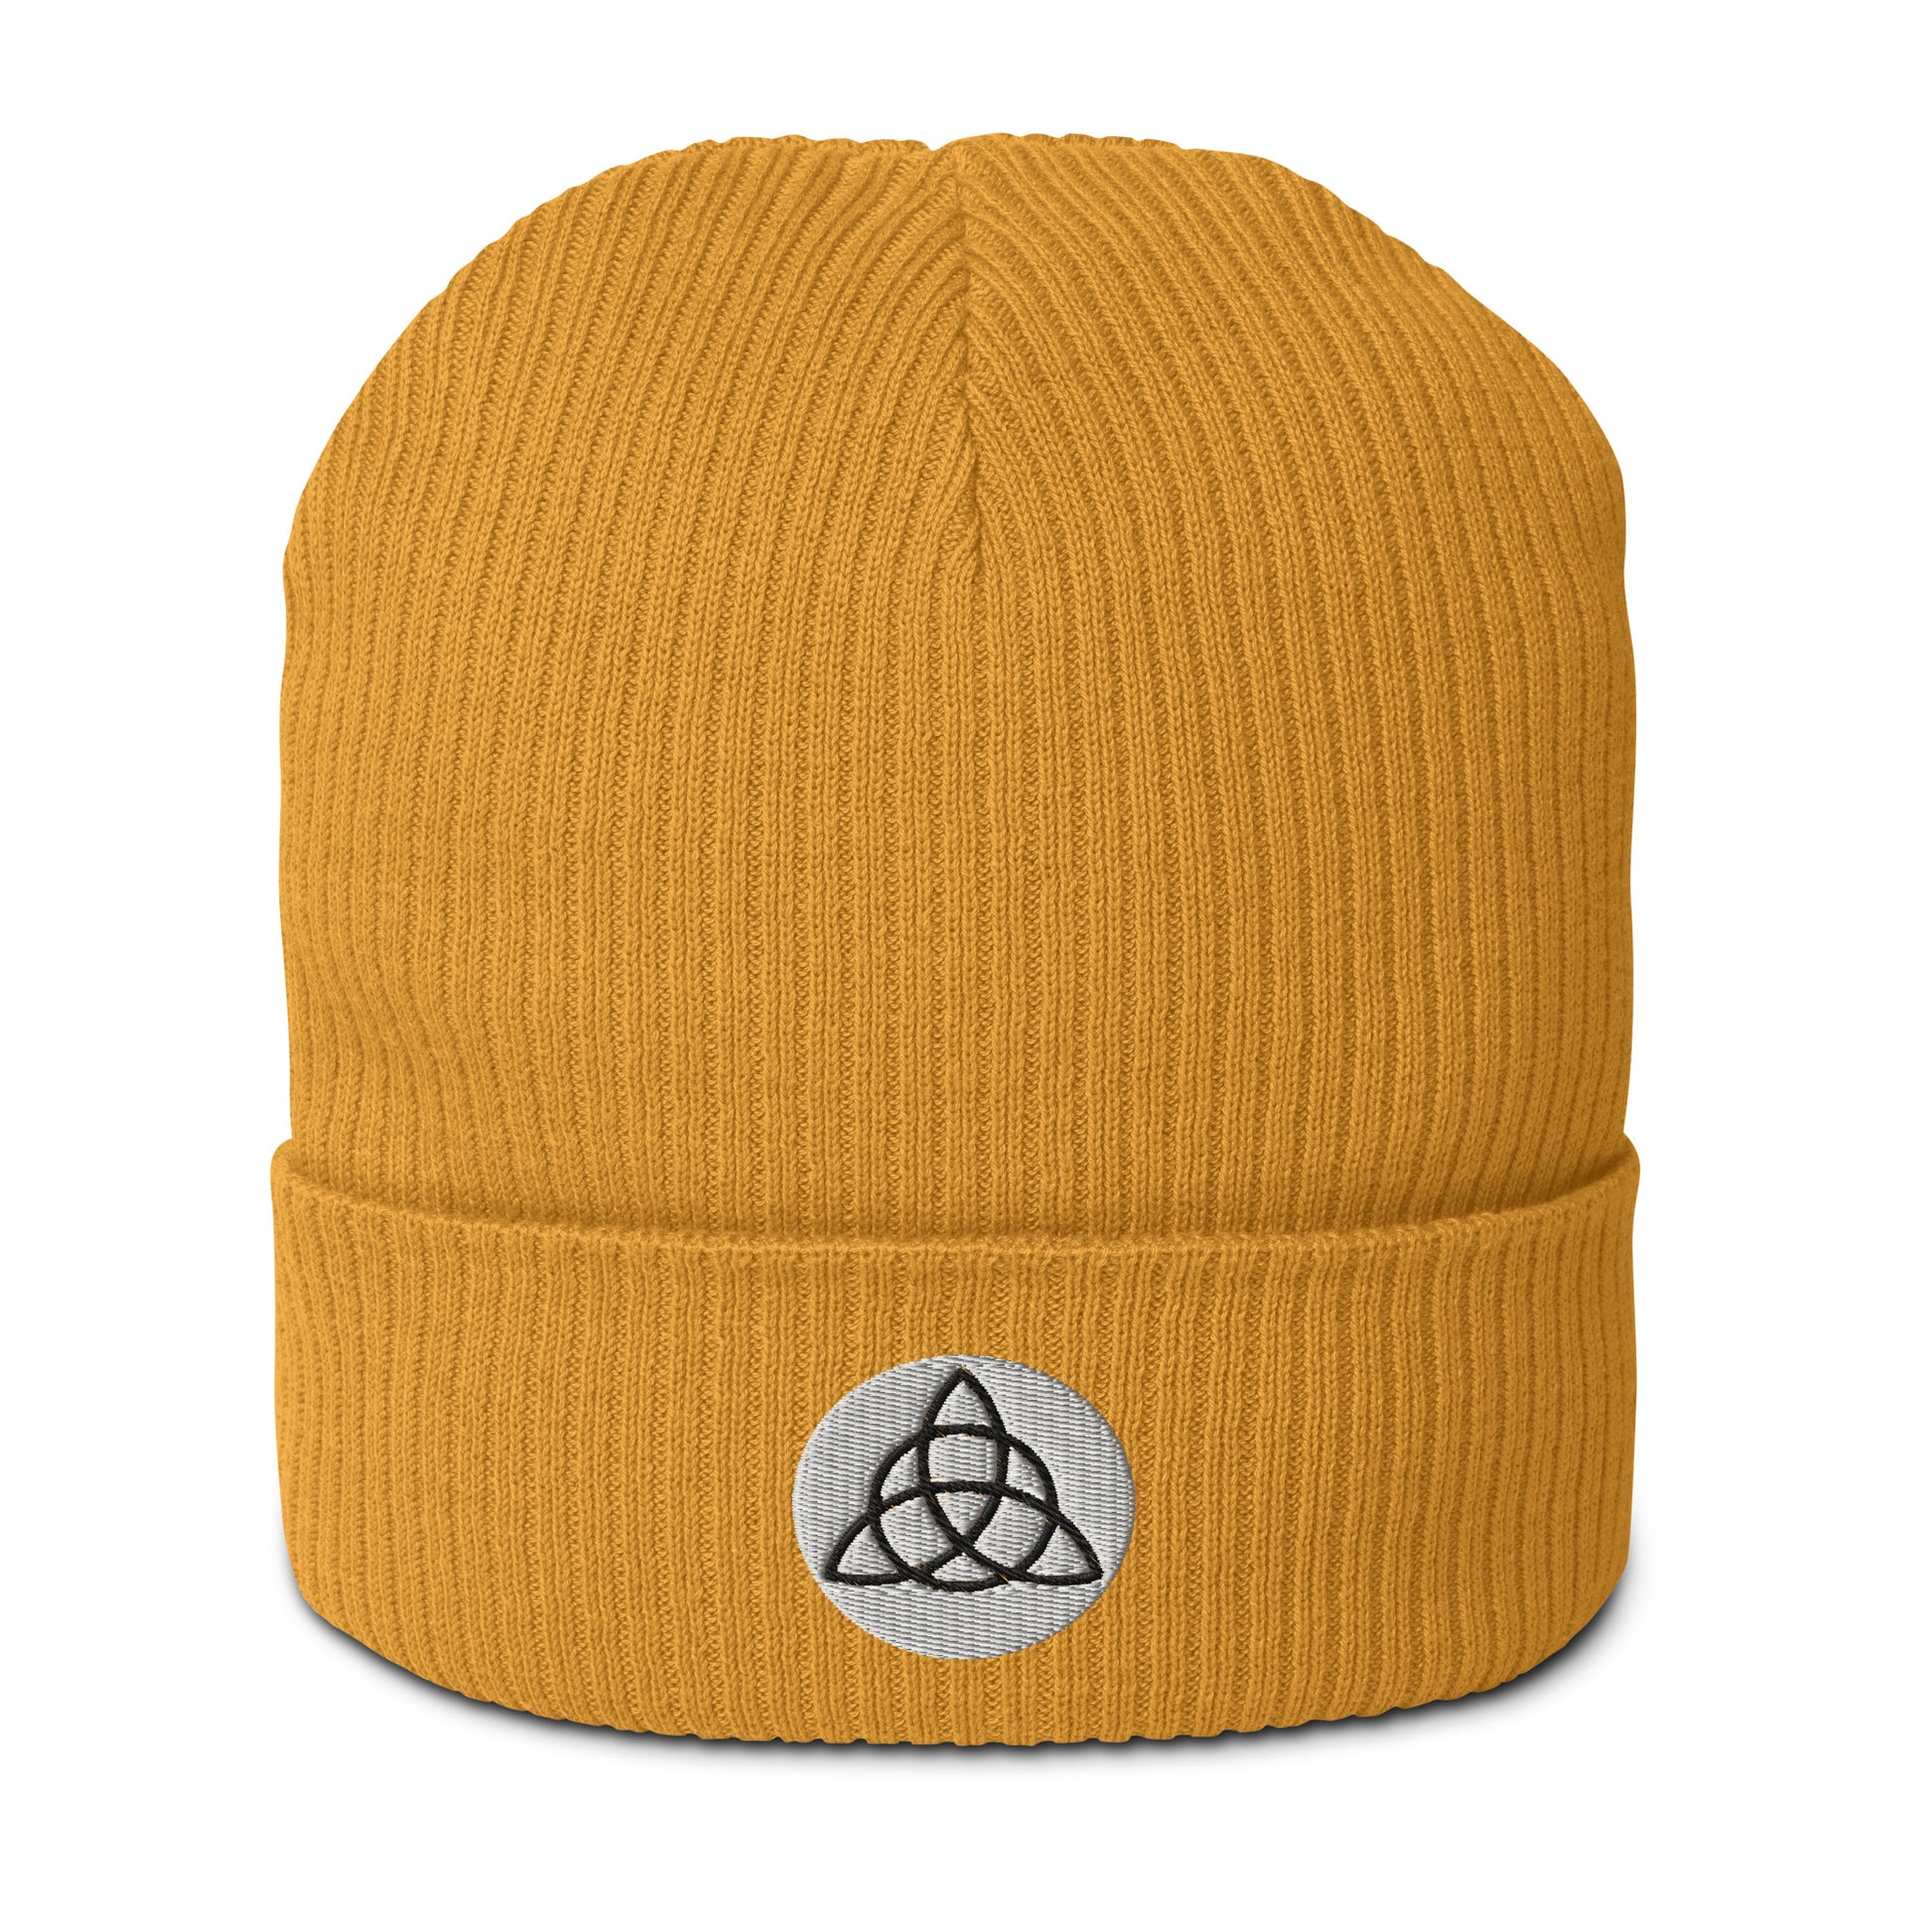 A ribbed beanie in Mustard Yellow hat made of organic cotton, embroidered with a Triquetra symbol, symbolizing unity, eternity, and the interconnectedness of mind, body, and spirit. This organic ribbed beanie is chic, versatile, and environmentally conscious, making it an essential addition to your hat collection. Crafted from breathable lightweight fabric, it's suitable for both indoor and outdoor wear. Made with hypoallergenic and natural materials. 